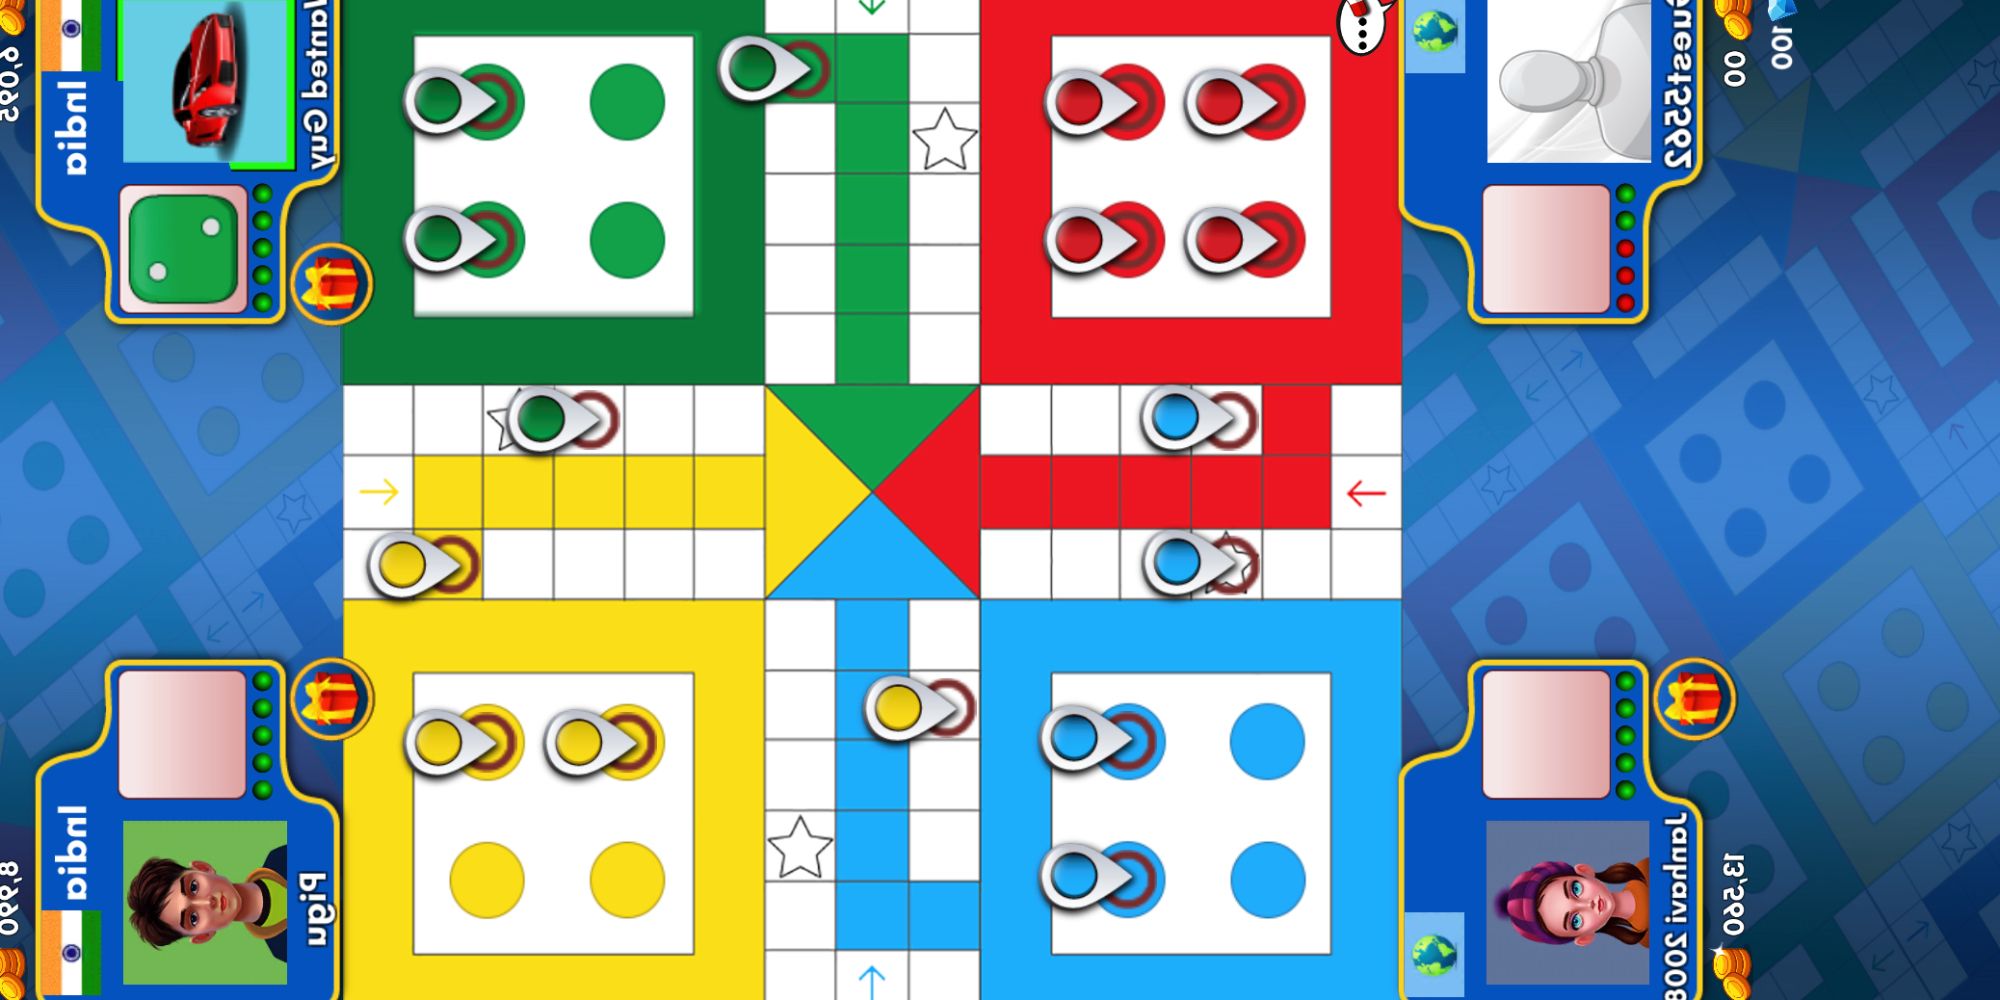 Ludo King 4 player classic game with green's turn